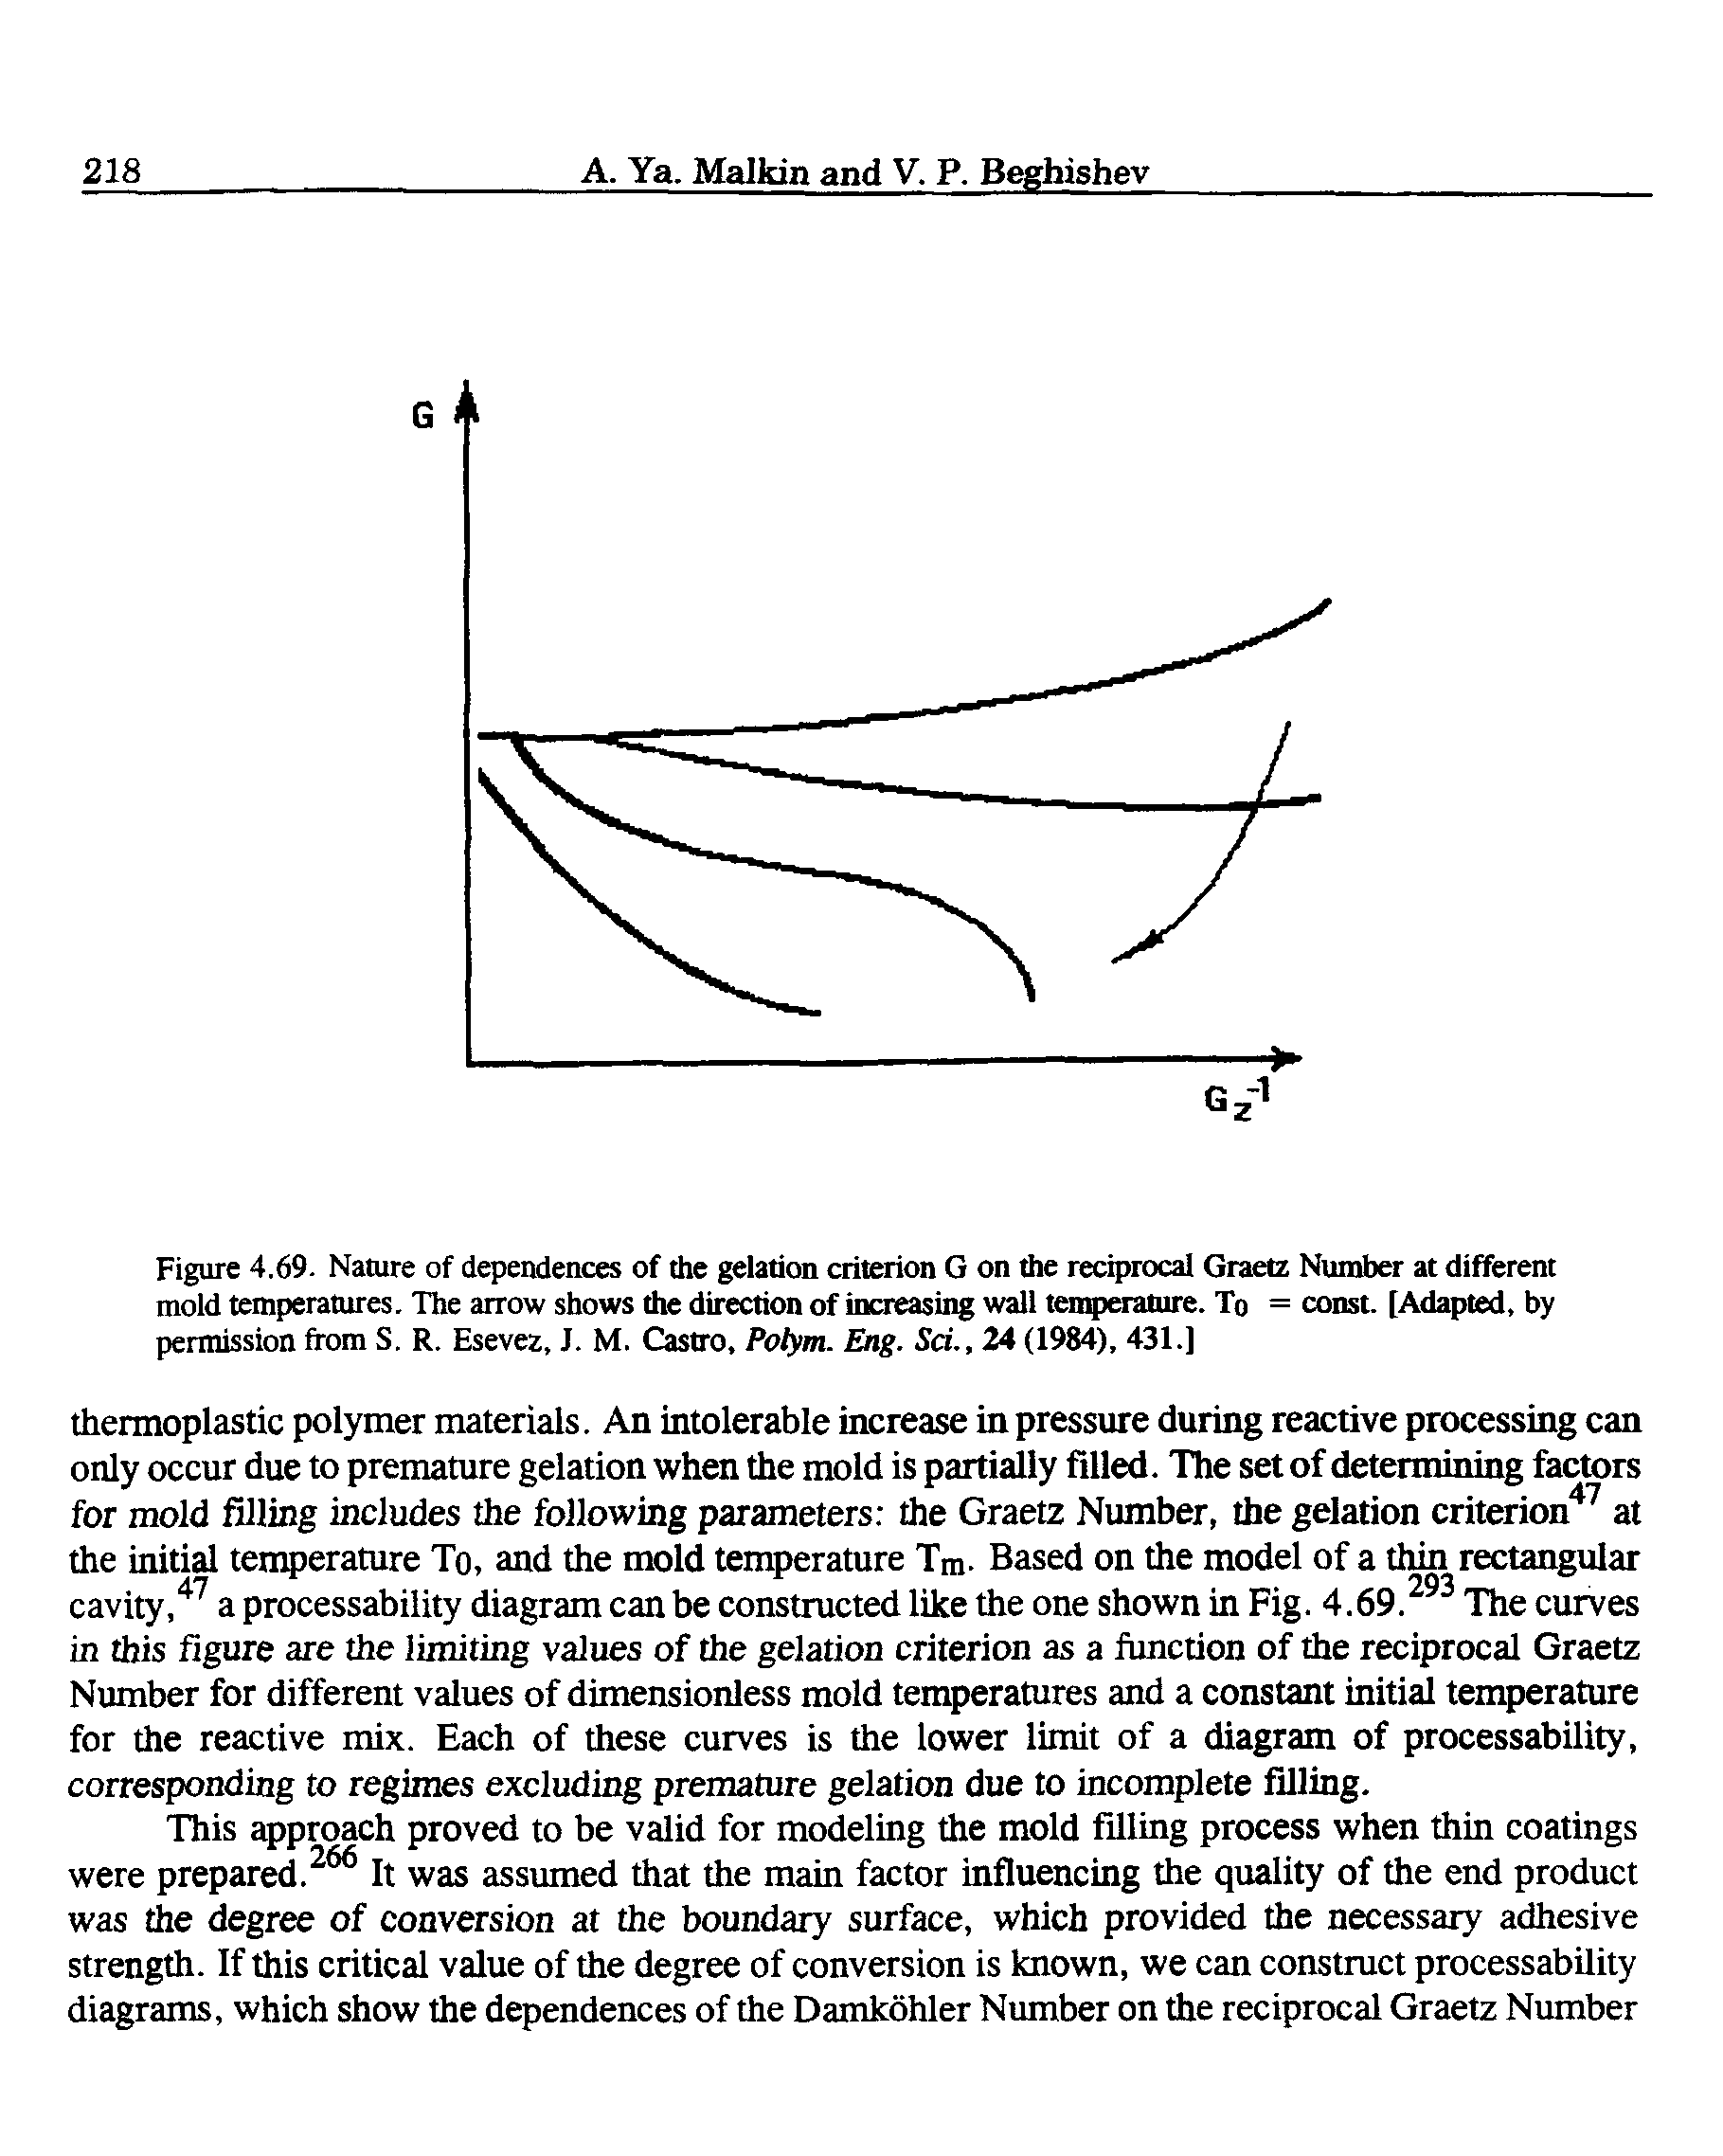 Figure 4.69. Nature of dependences of the gelation criterion G on the reciprocal Graetz Number at different mold temperatures. The arrow shows the direction of increasing wall temperature. To = const. [Adapted, by permission from S. R. Esevez, J. M. Castro, Potym. Eng. Sd., 24 (1984), 431.]...